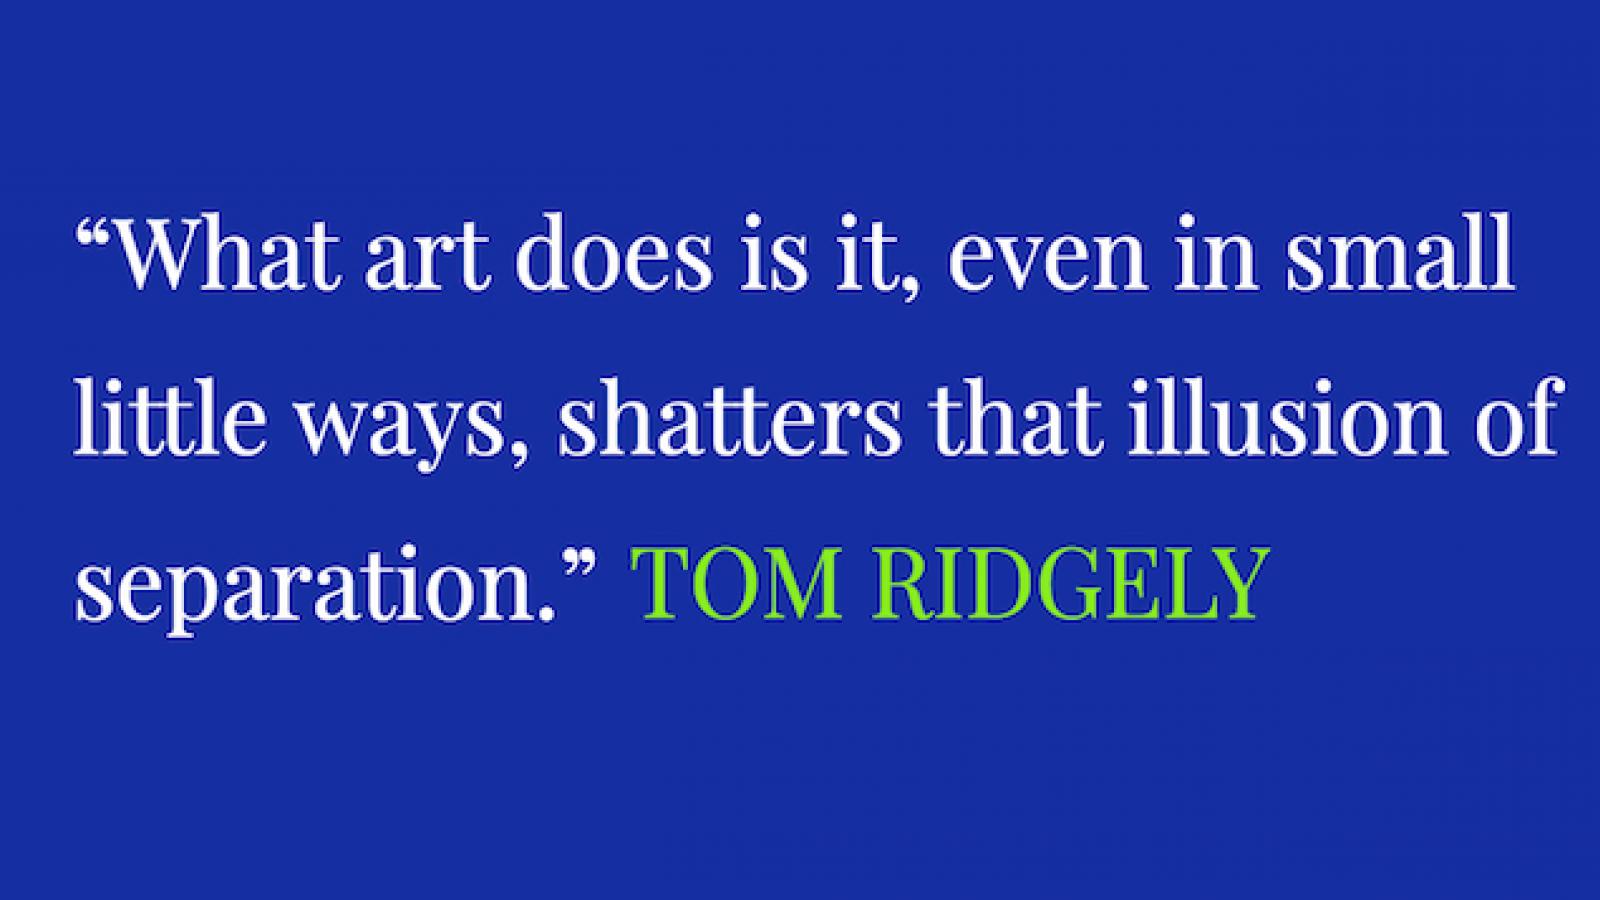 quote by Tom Ridgely